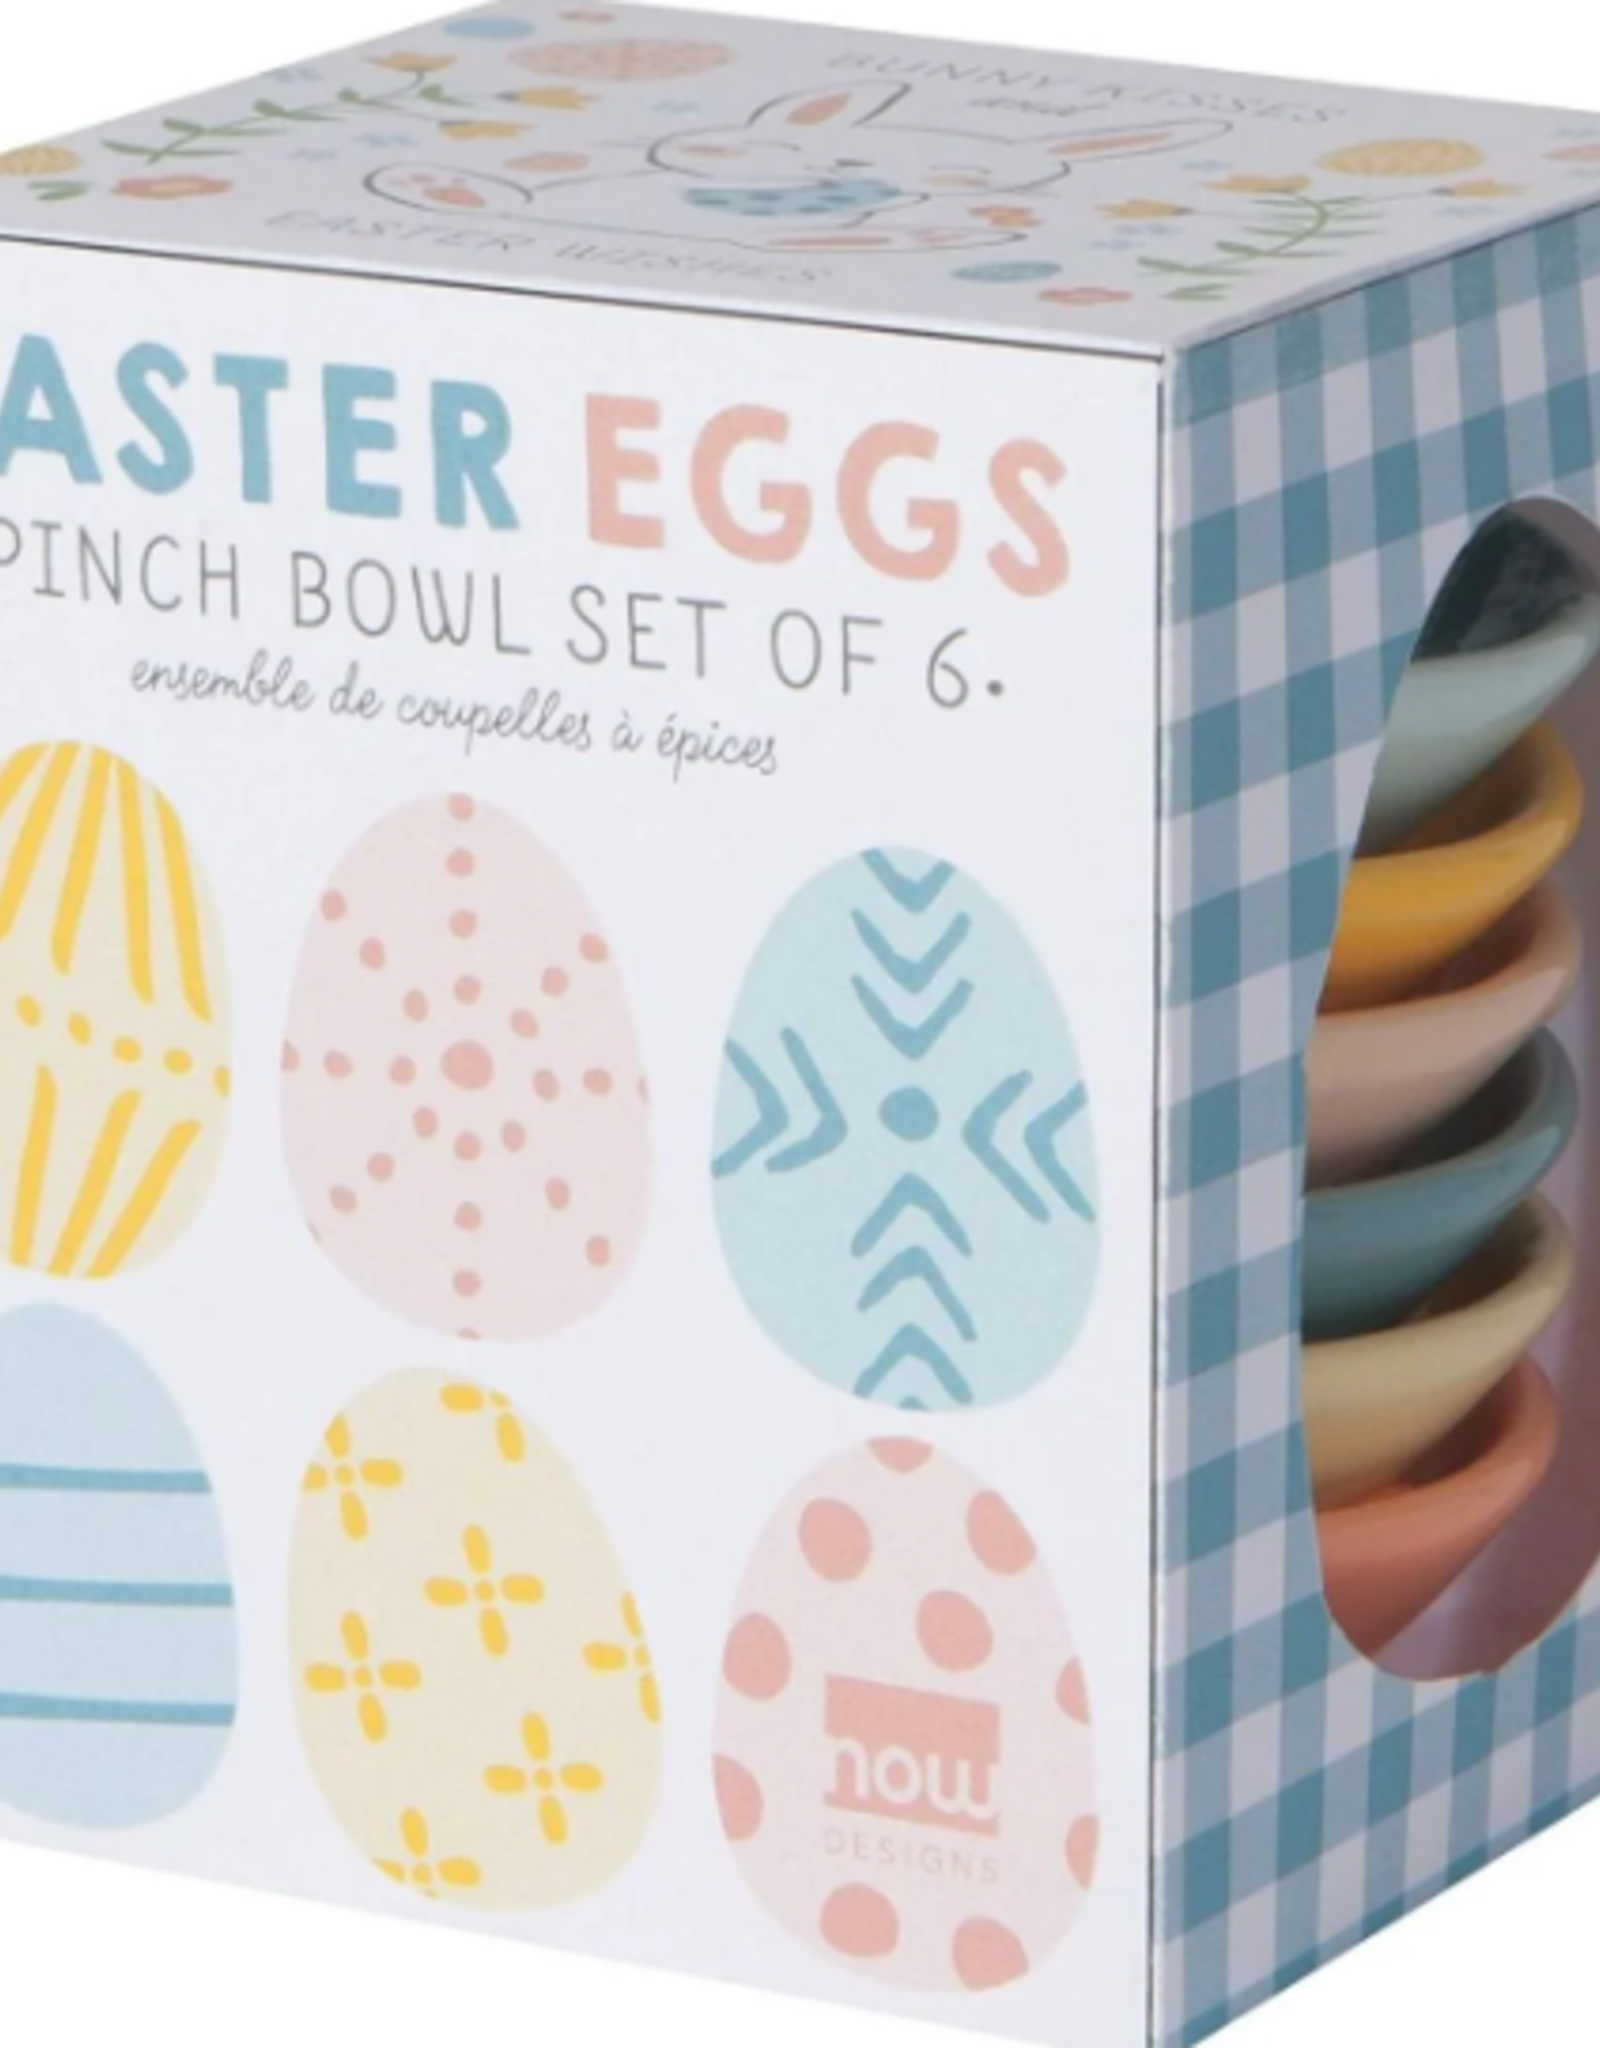 Danica + Now Designs Pinch Bowl - Easter Eggs Sets of 6